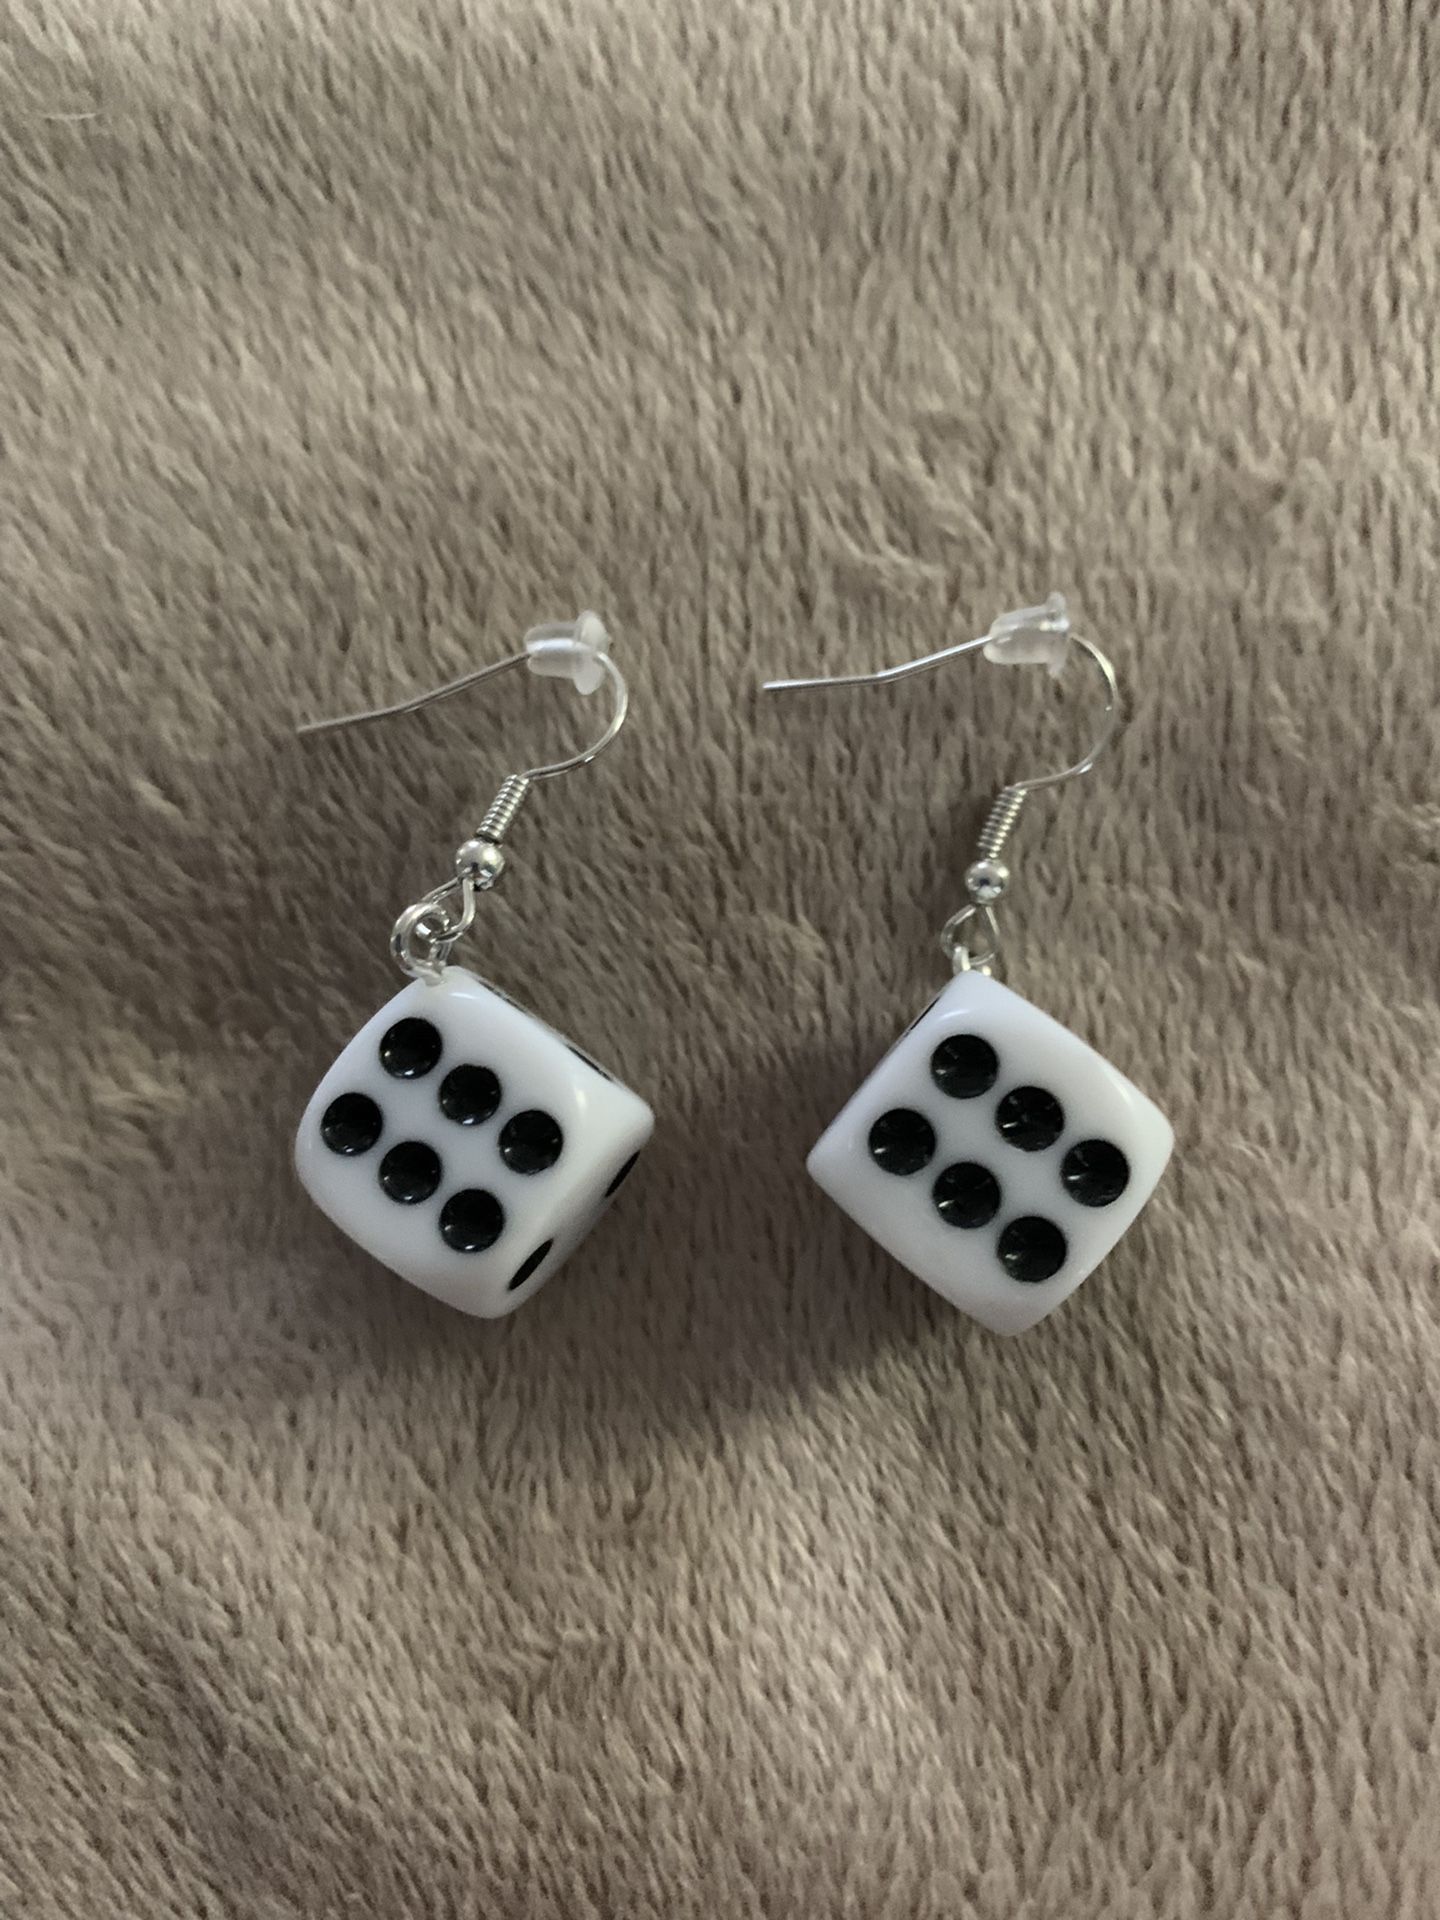 Take A Chance & Roll The Dice With This Winning Set Of Earrings!